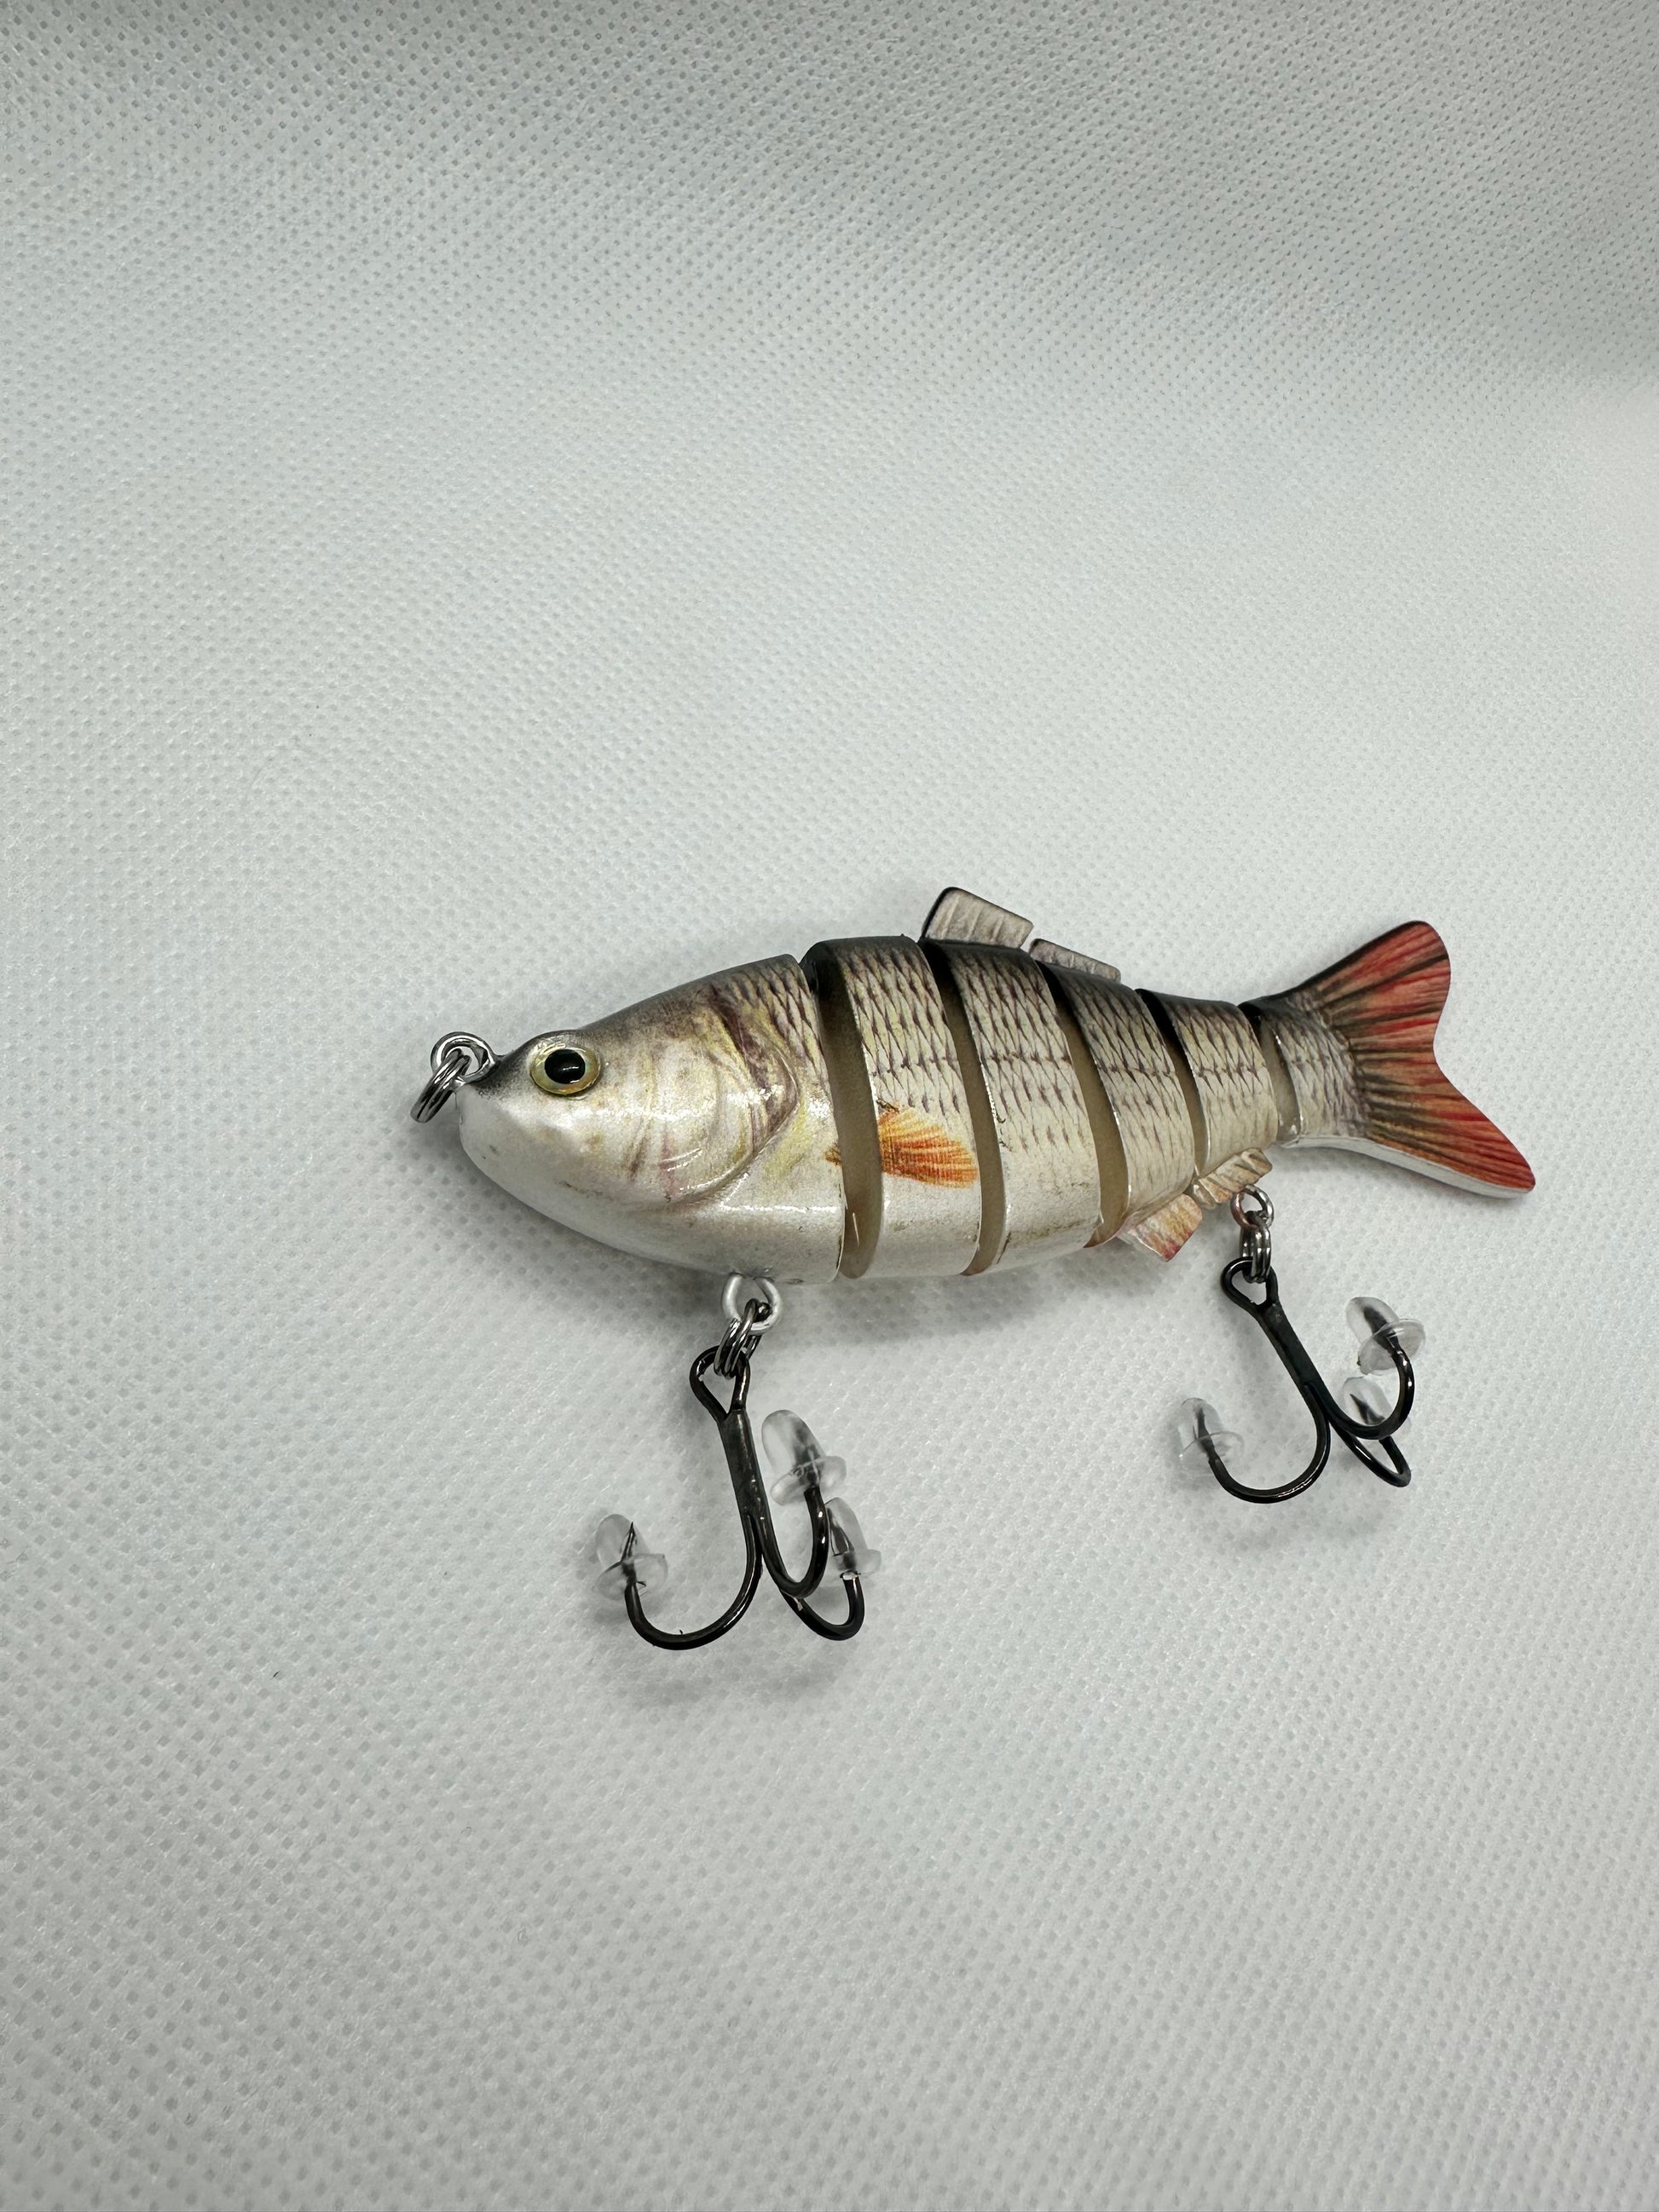 Baby Bass Jointed Swim Bait Reely's Tackle, 56% OFF